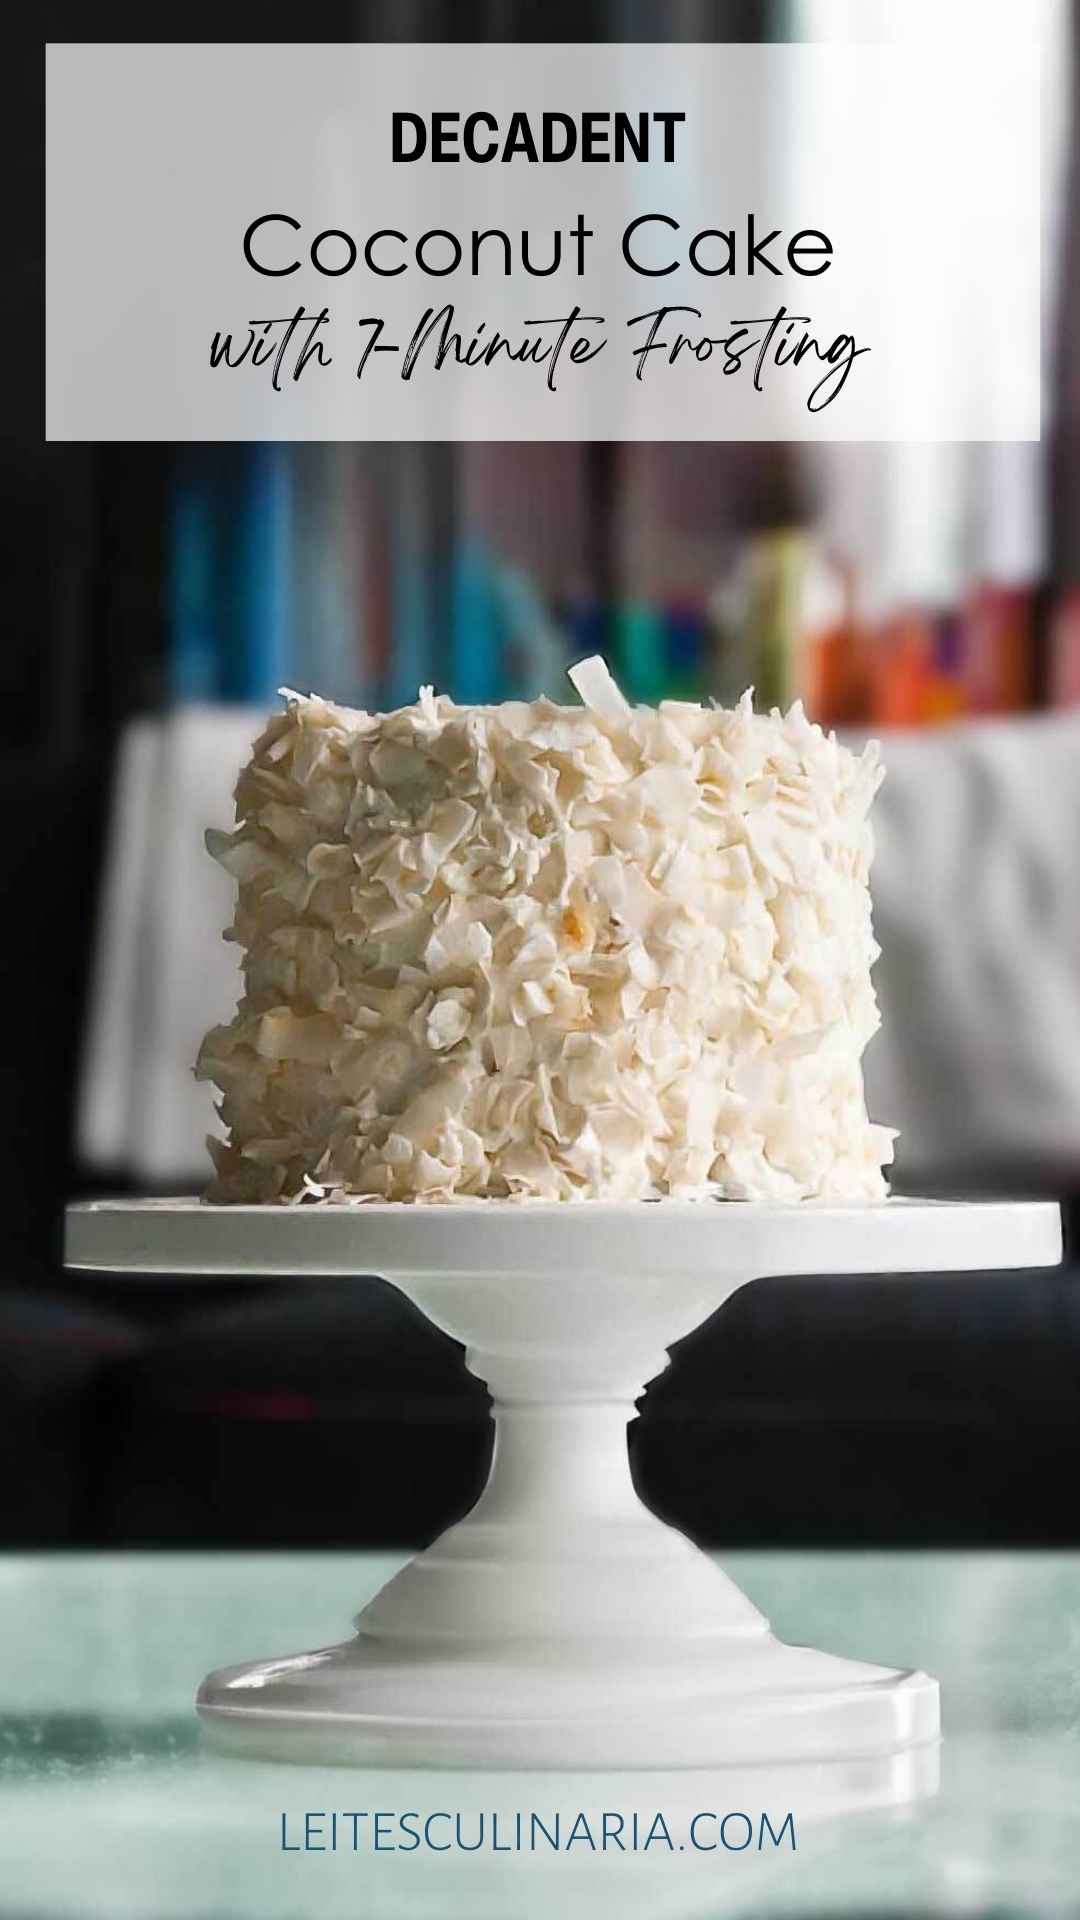 A coconut cake covered in flakes of coconut on a white cake stand.